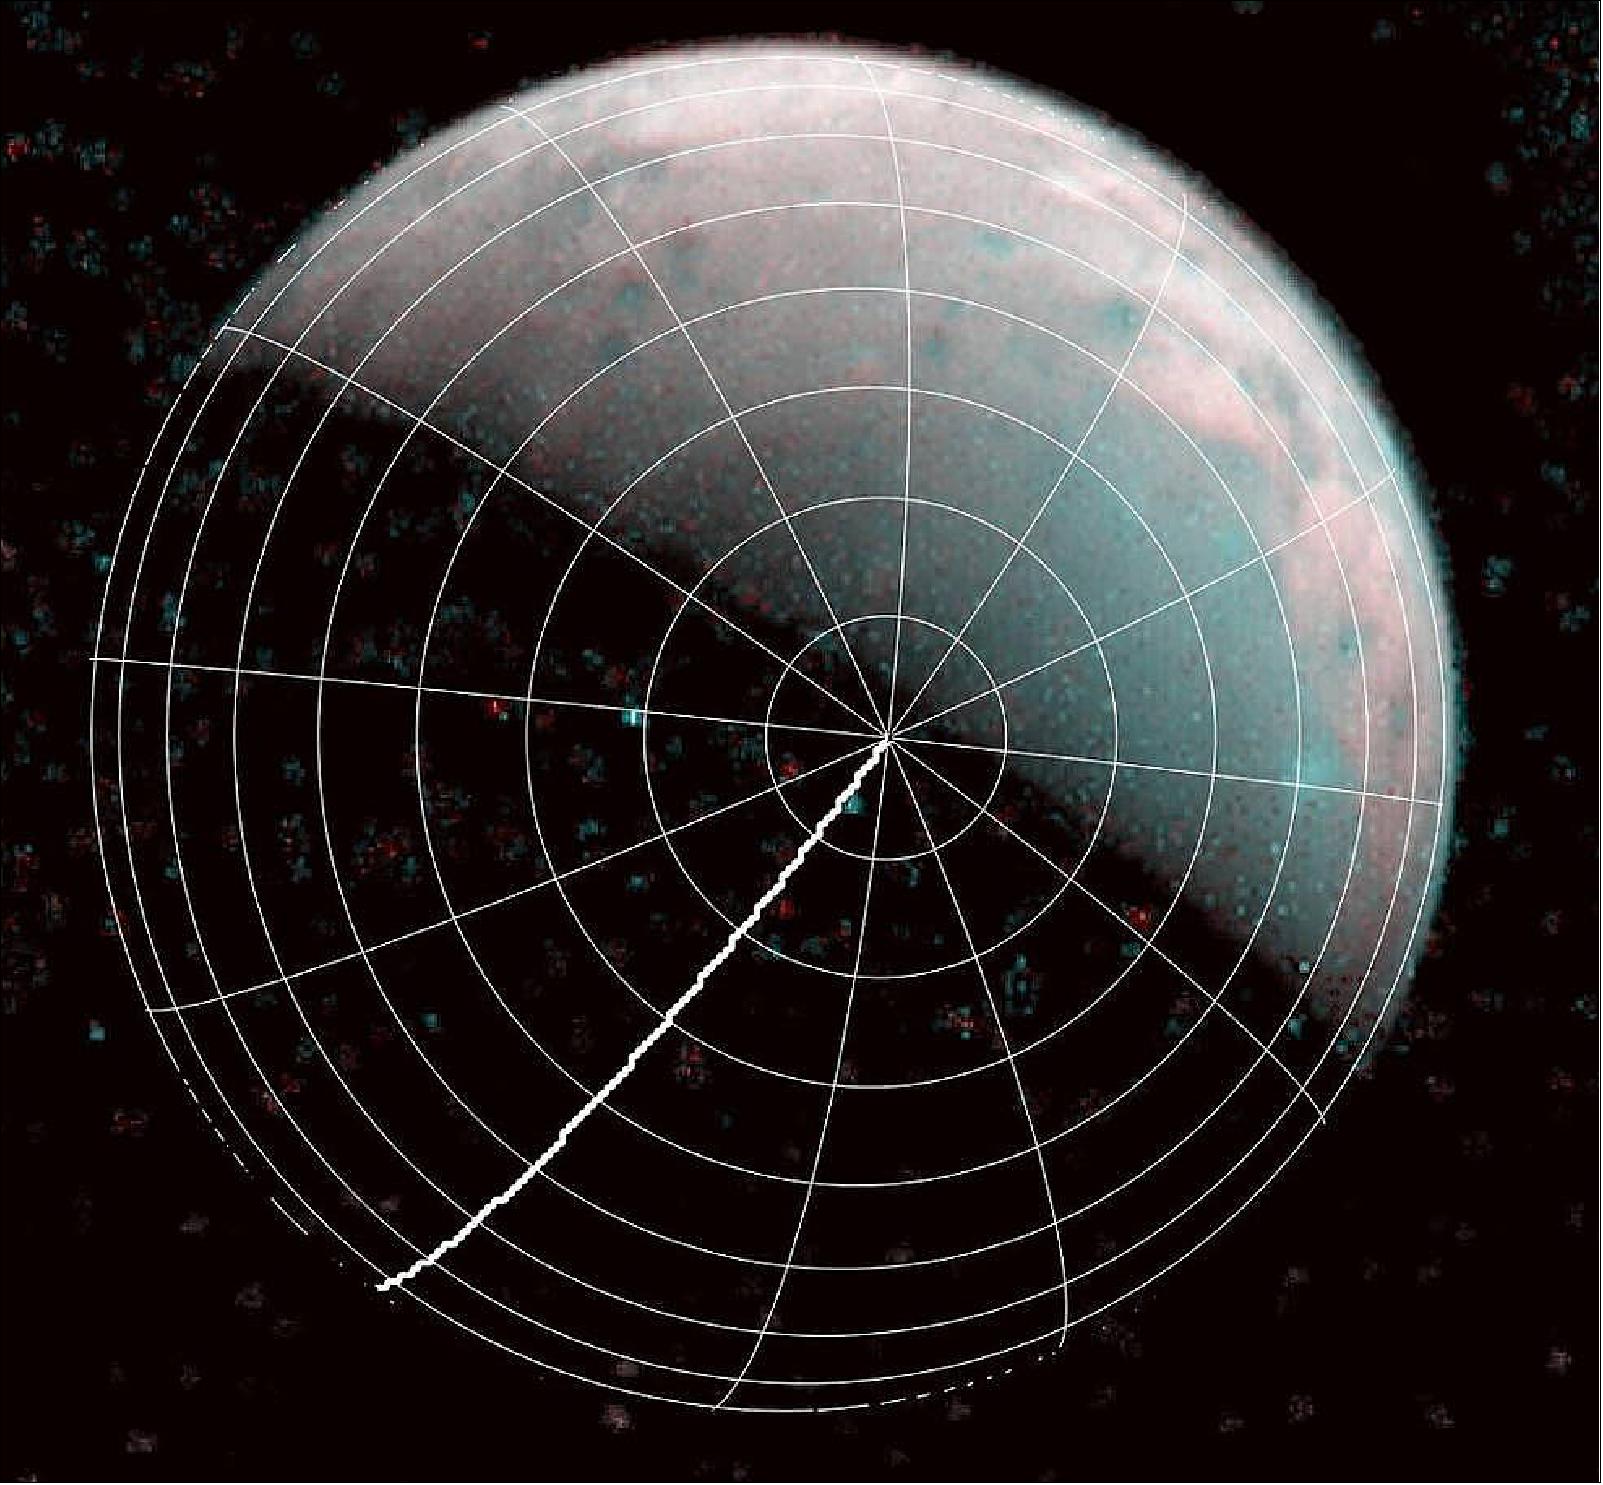 Figure 30: The north pole of Ganymede can be seen in center of this annotated image taken by the JIRAM infrared imager aboard NASA's Juno spacecraft on Dec. 26, 2019. The thick line is 0-degrees longitude (image credits: NASA/JPL-Caltech/SwRI/ASI/INAF/JIRAM)